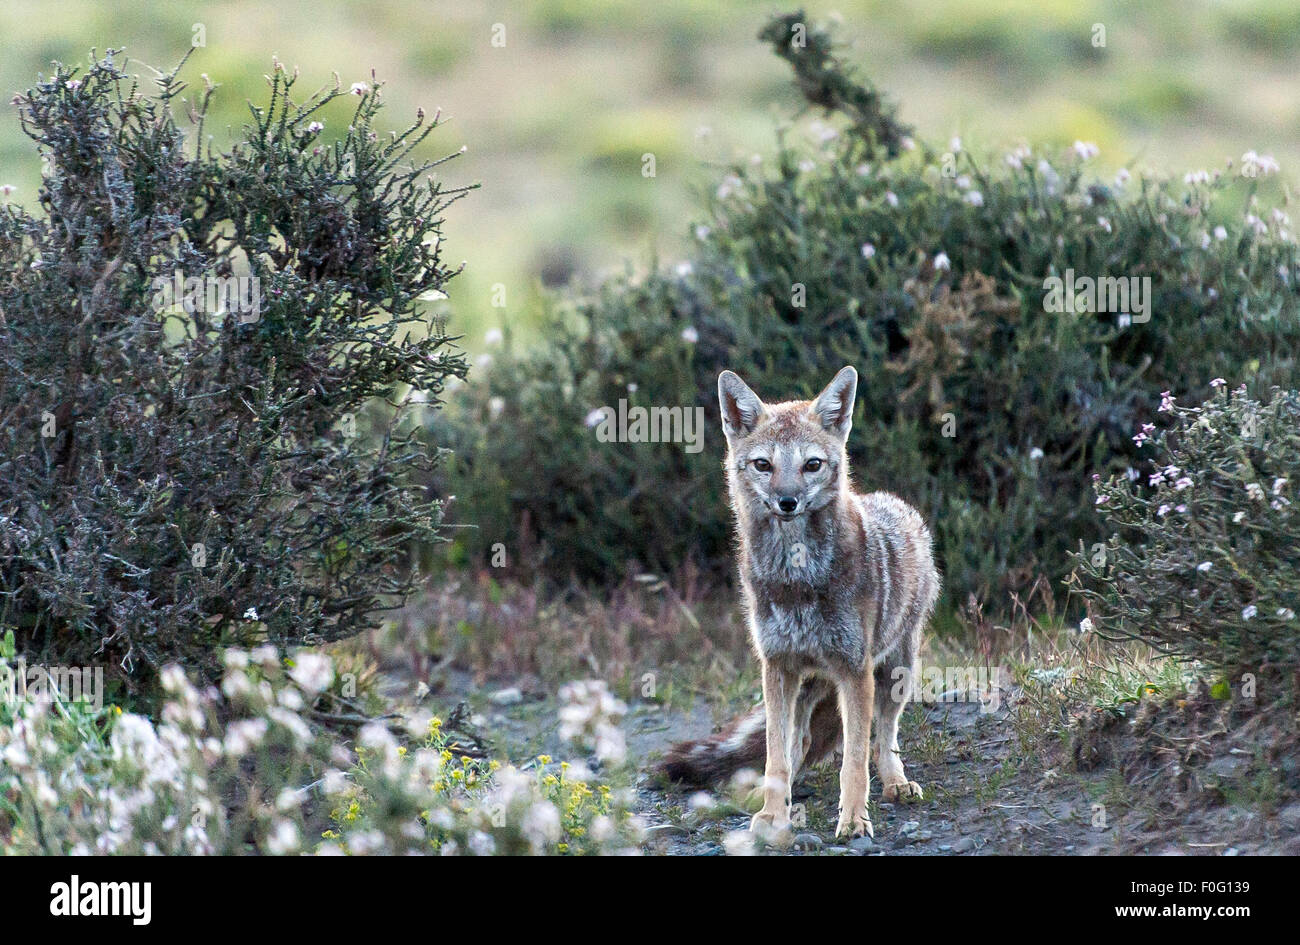 South American or Patagonian grey fox portrait Cerro Guido estancia Torres del Paine National Park Chilean Patagonia Chile Stock Photo